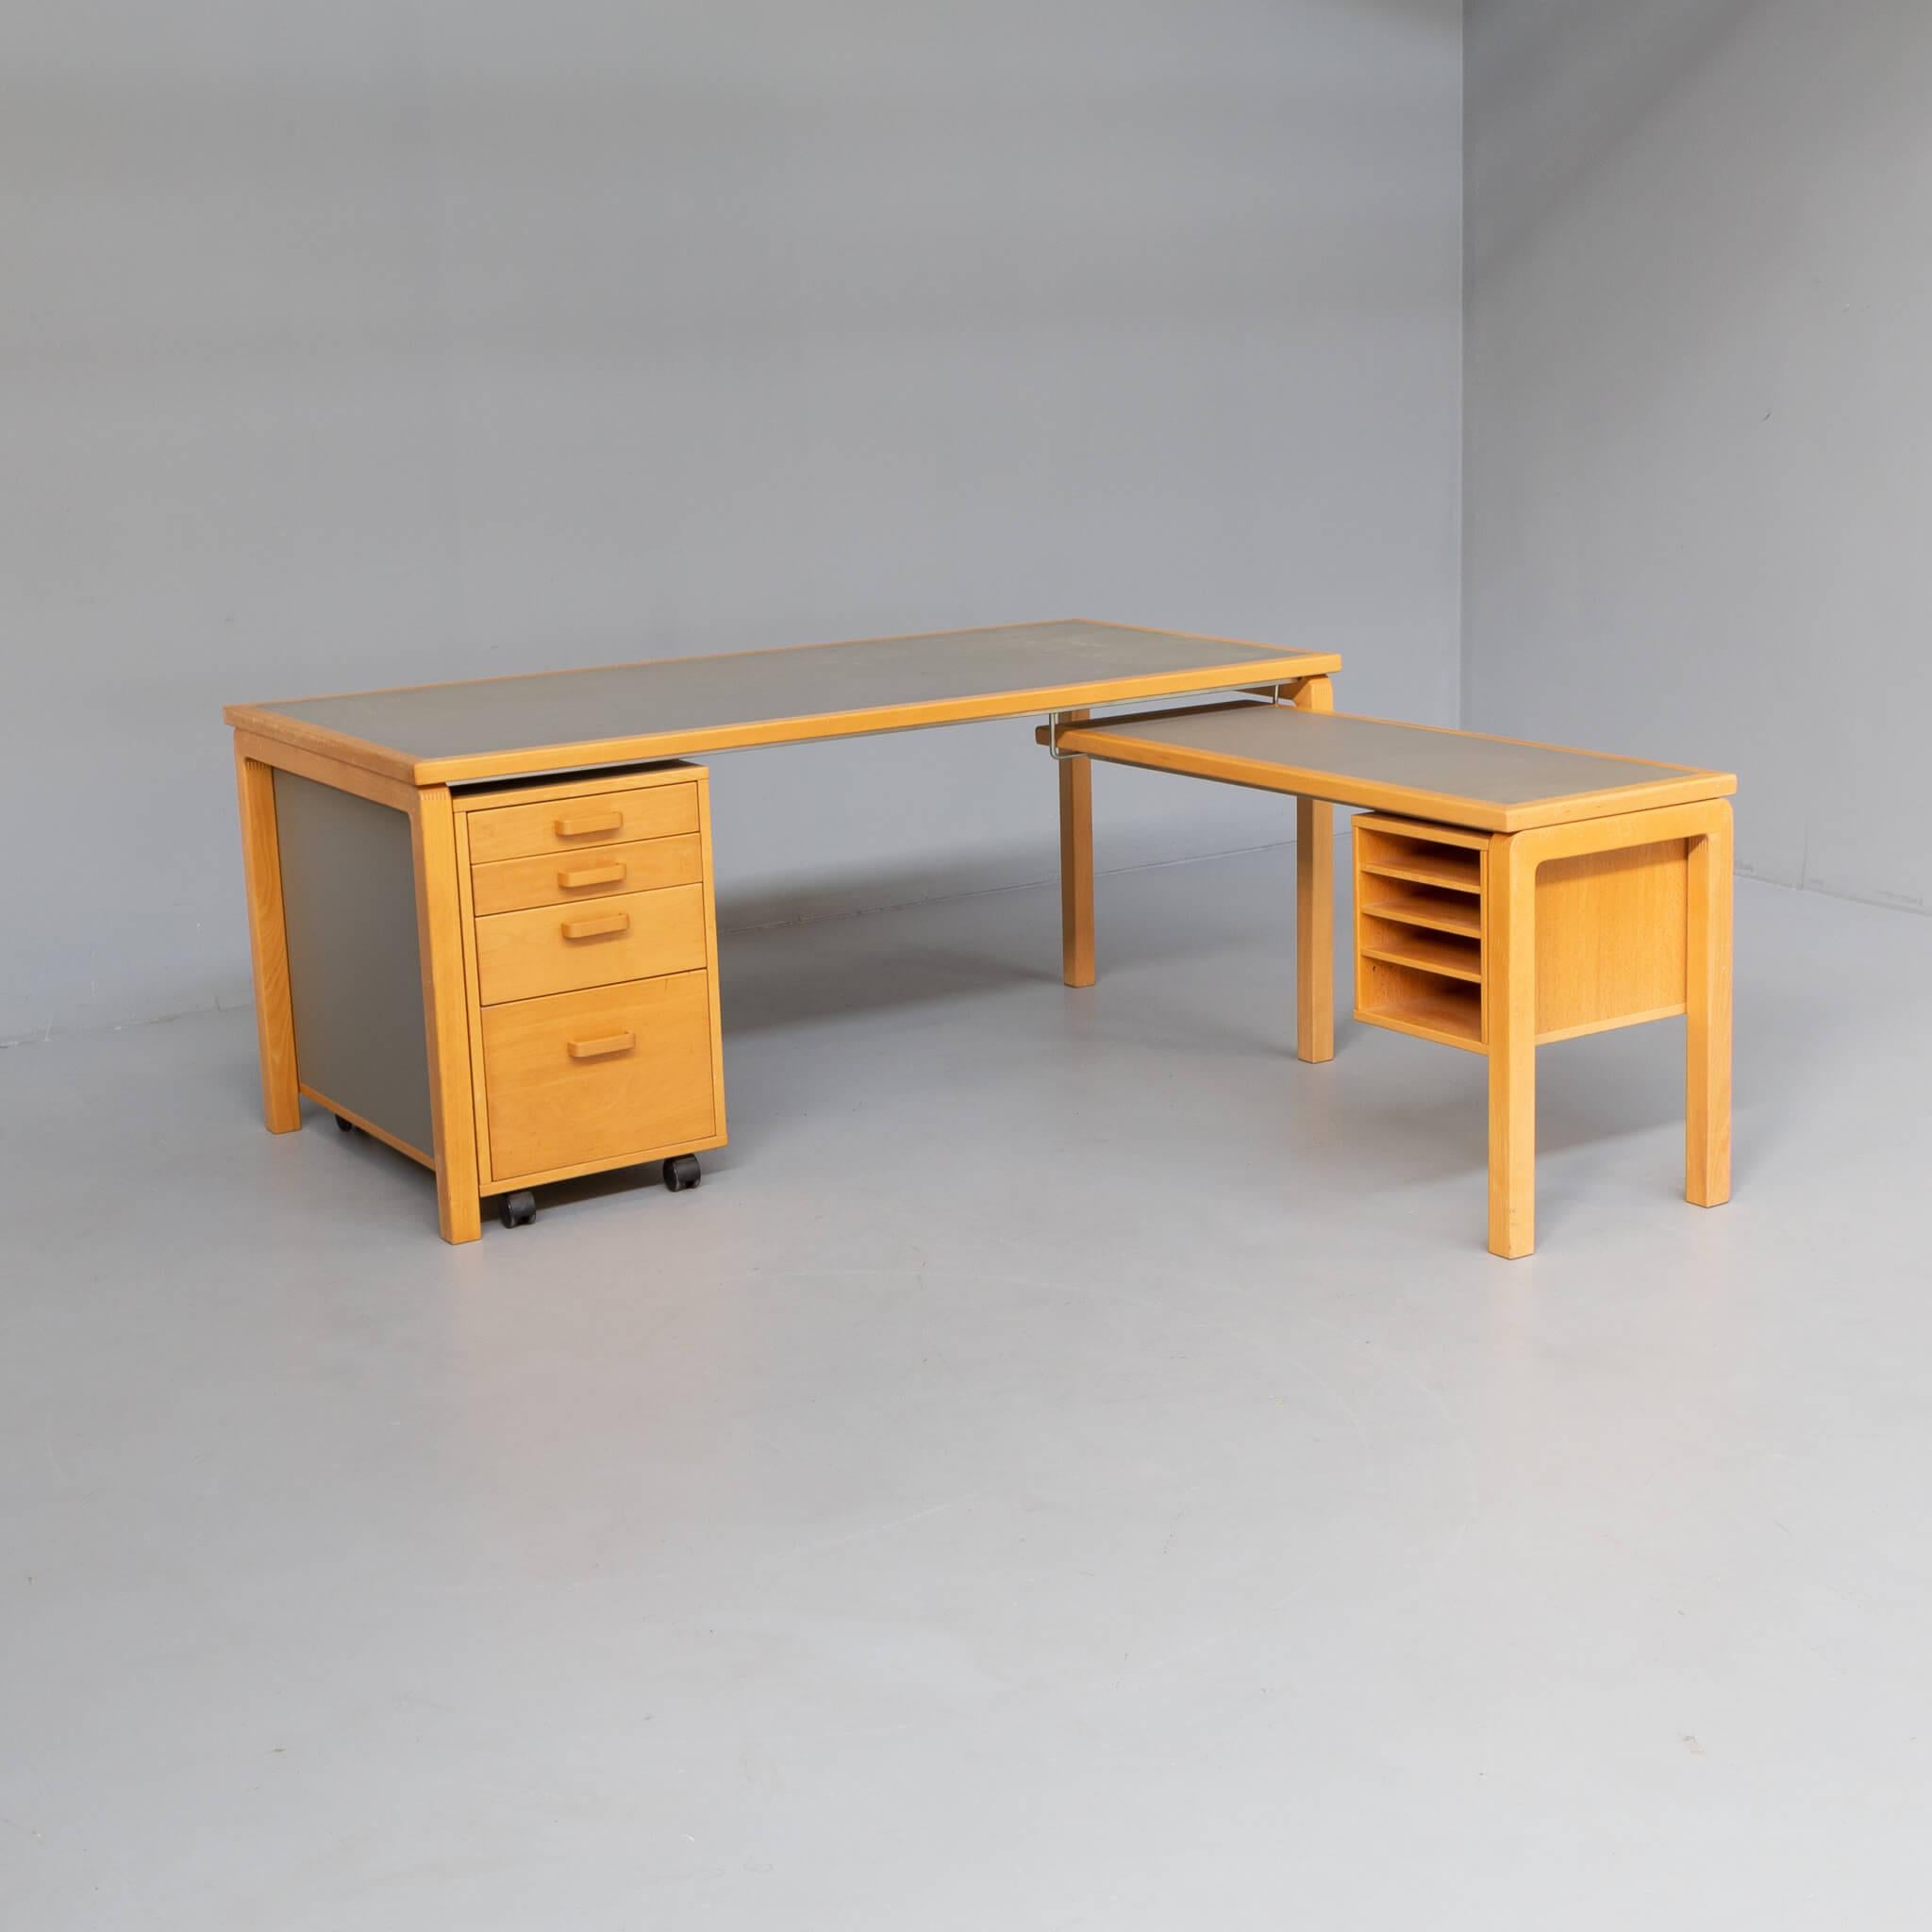 n the 1960s Thygesen and Sorensen made a trend for Magnus Olesen to design slim lined writing desks in beech wood combined with softtop tabletops. We think the designer of this unique desk in the 1980s, most likely German or scandinavian, is